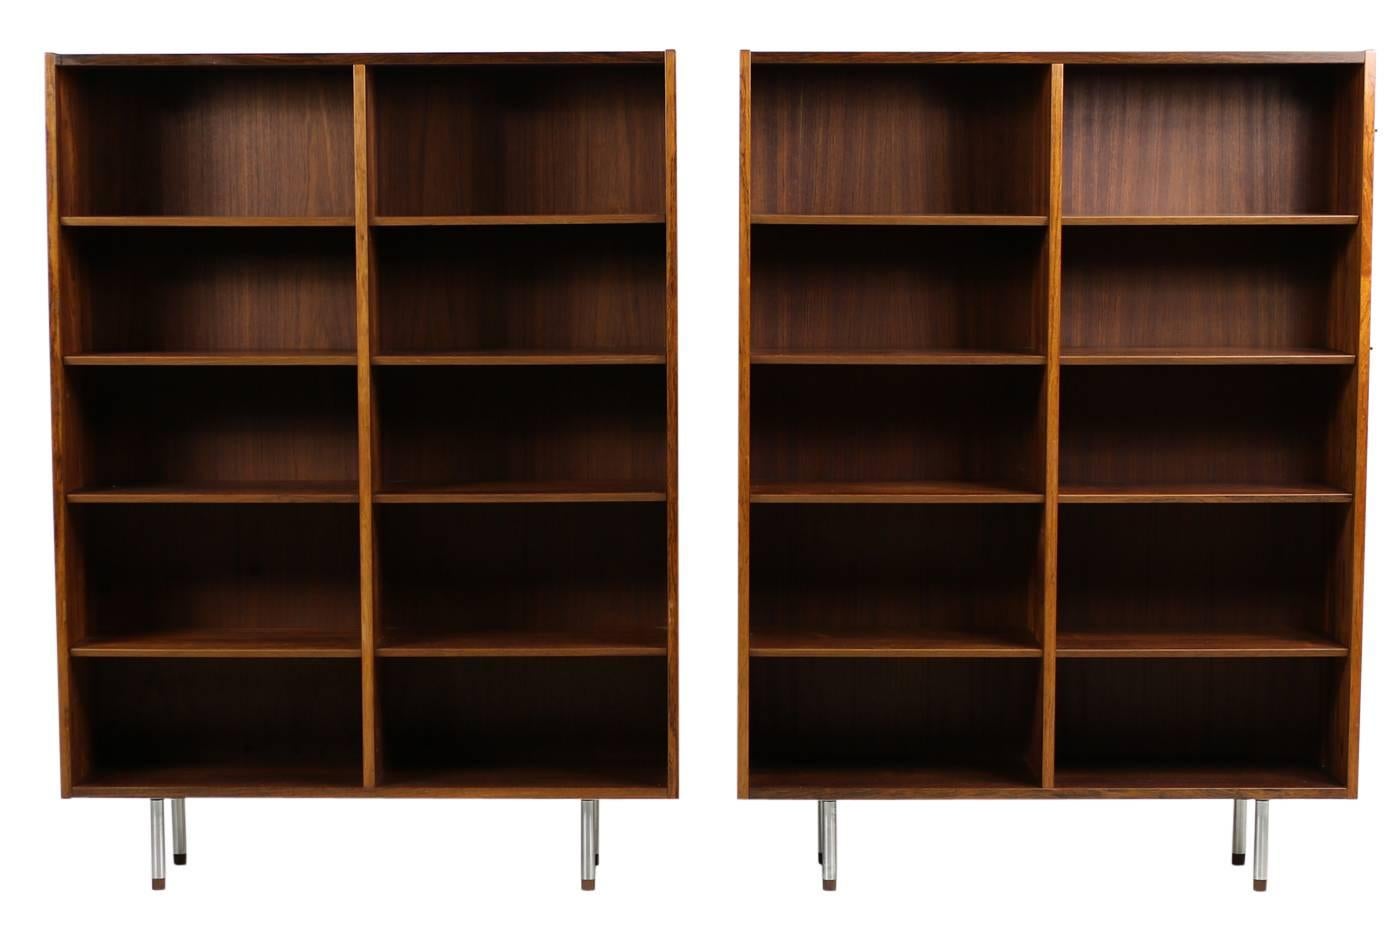 Beautiful pair of 1960s Danish Modern bookcases by Poul Hundevad, Made in Denmark. Very good condition, no holes in the back wall, adjustable shelves, overall 16 adjustable shelves and 2 units, fantastic patina and great condition. Here the higher